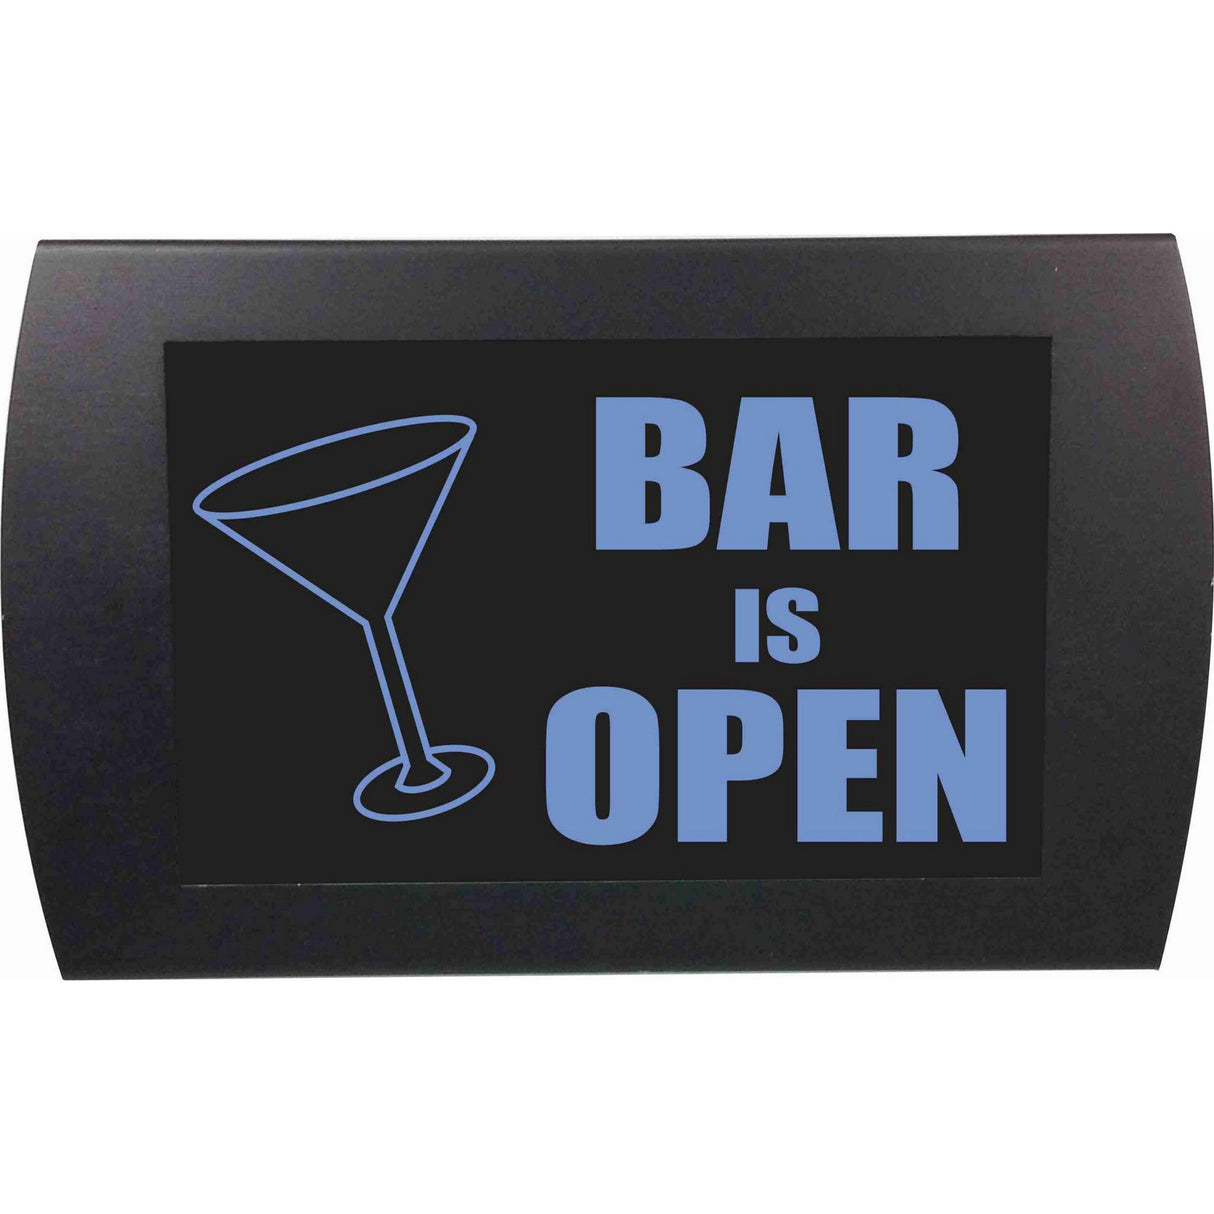 American Recorder OAS-2014M-BL "BAR IS OPEN" LED Lighted Sign, Blue